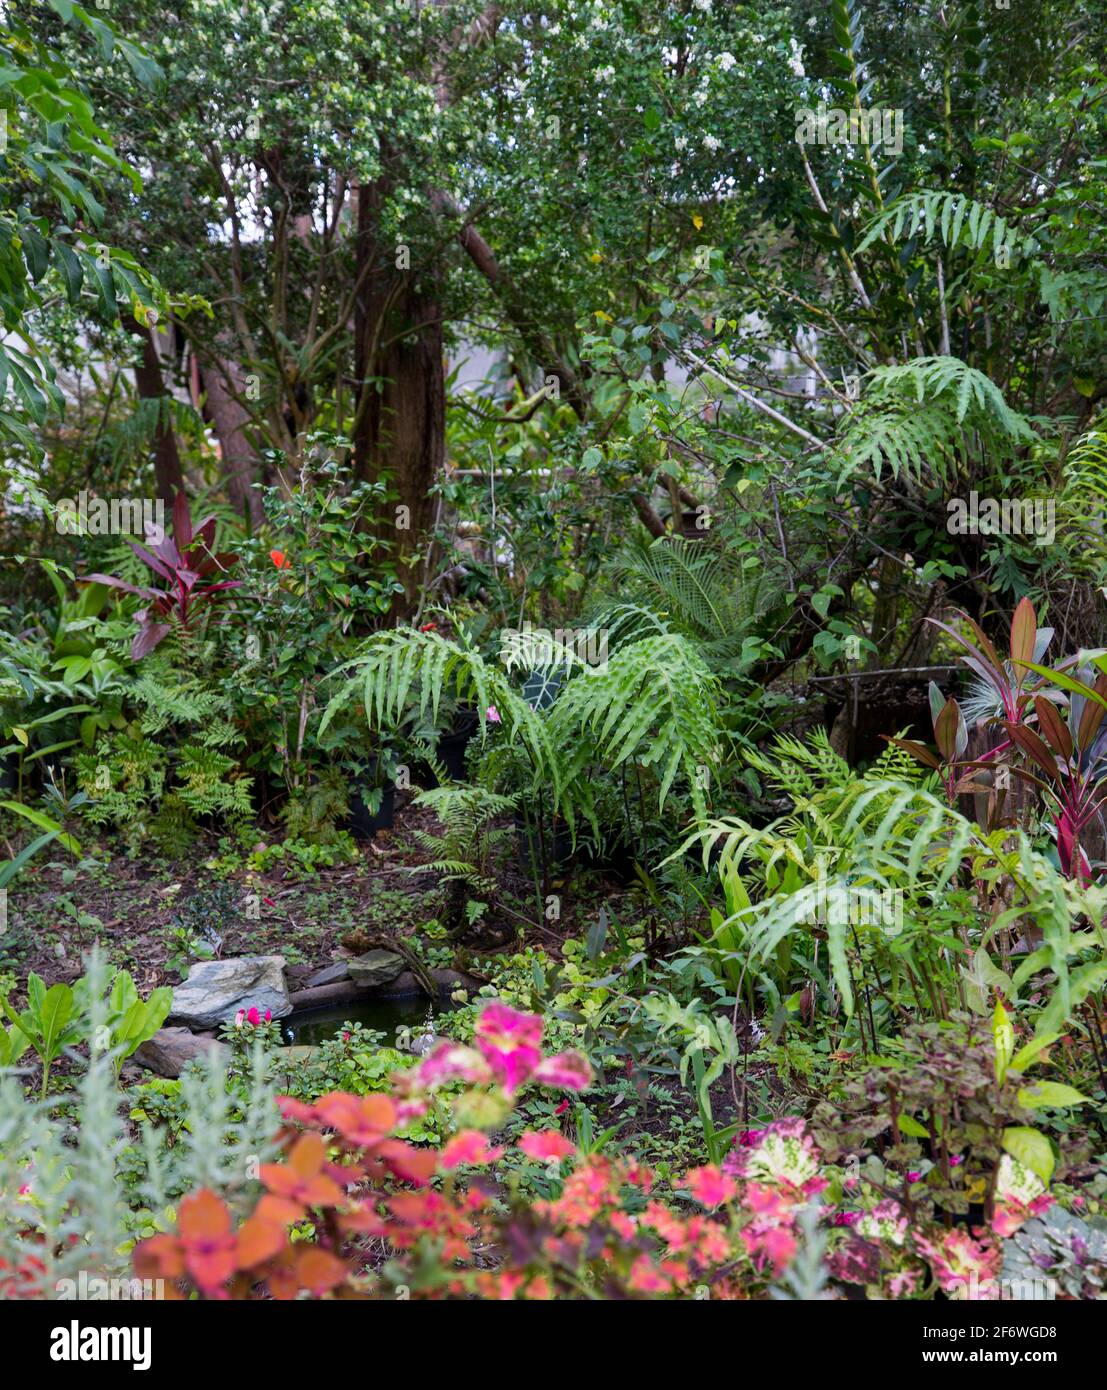 Lush sub-tropical garden with green ferns, colourful foliage plants - cordylines and coleus, beneath a canopy of trees in Australia Stock Photo